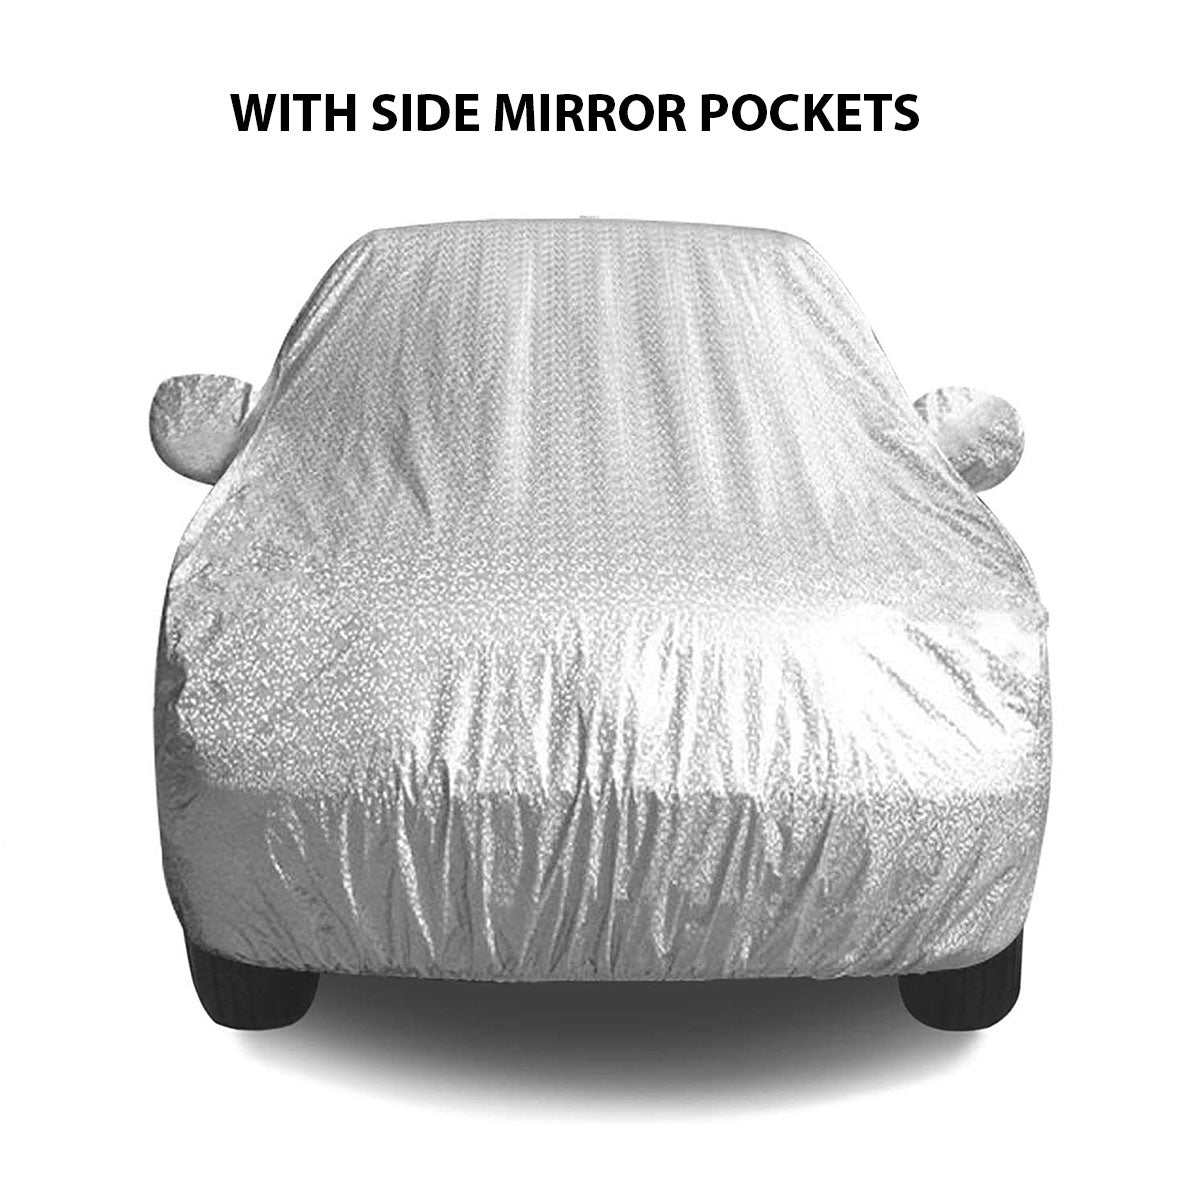 Oshotto Spyro Silver Anti Reflective, dustproof and Water Proof Car Body Cover with Mirror Pockets For Skoda Laura